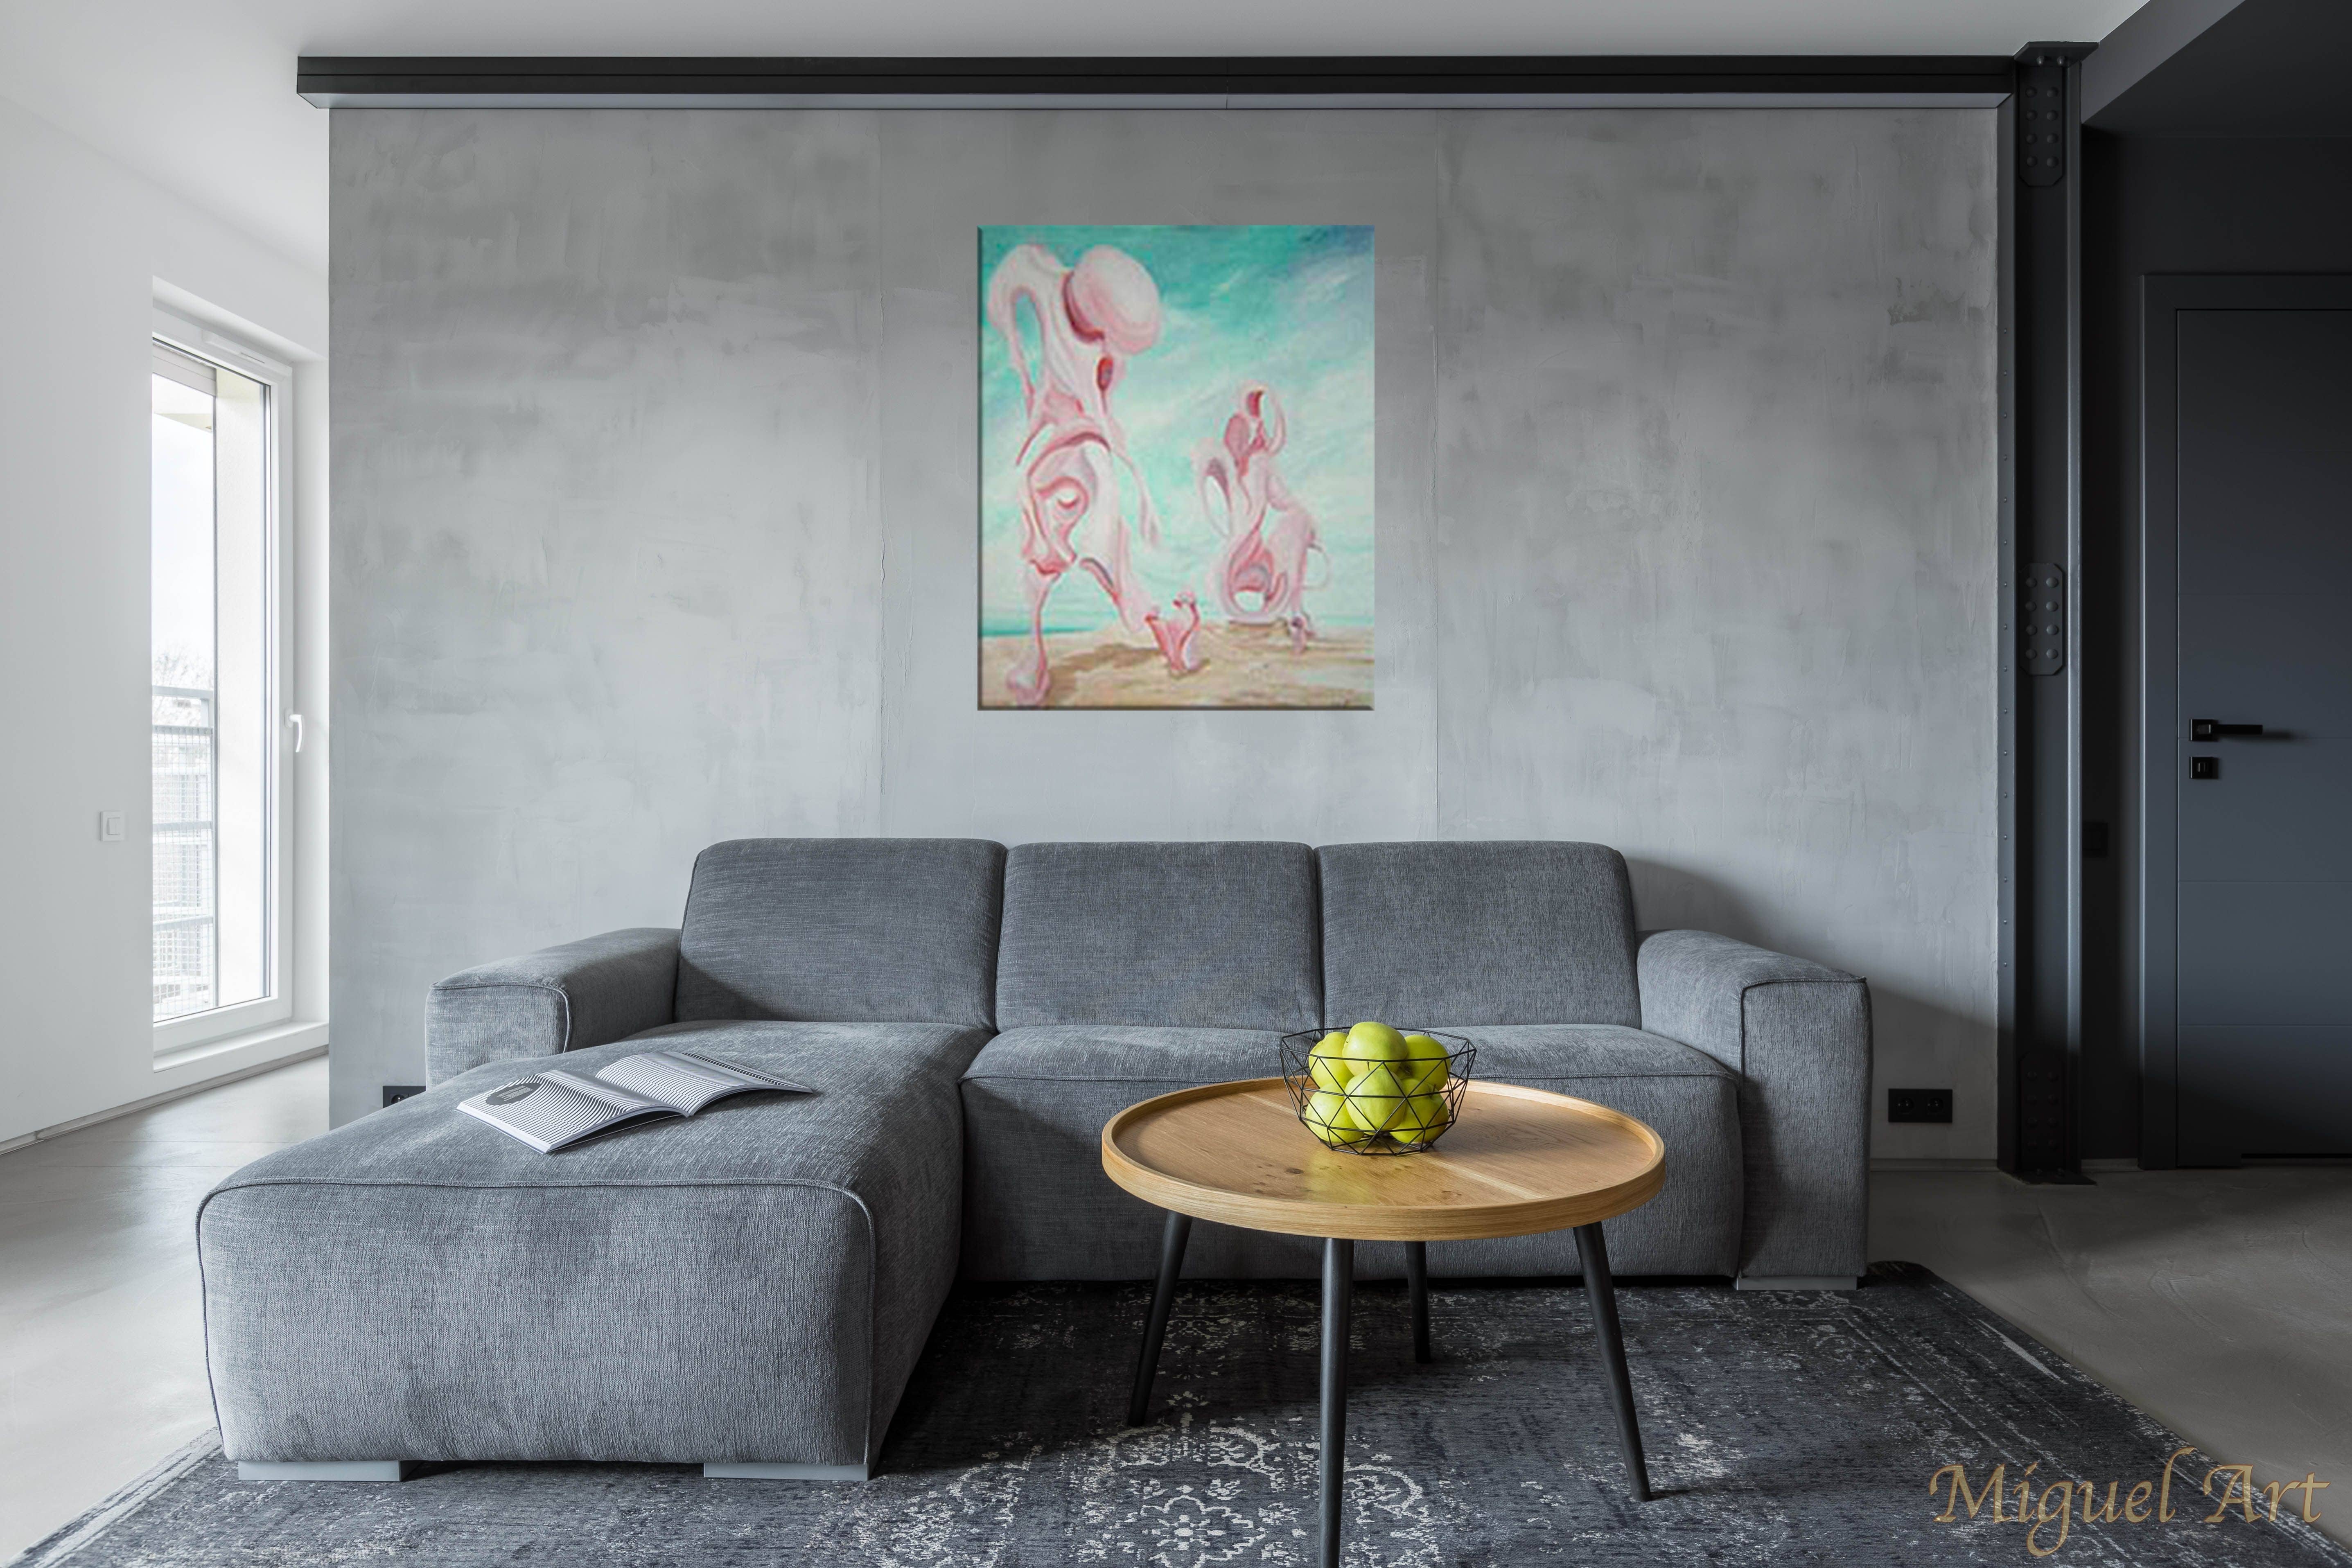 Painting of Flamboyance displayed on the wall above a grey couch